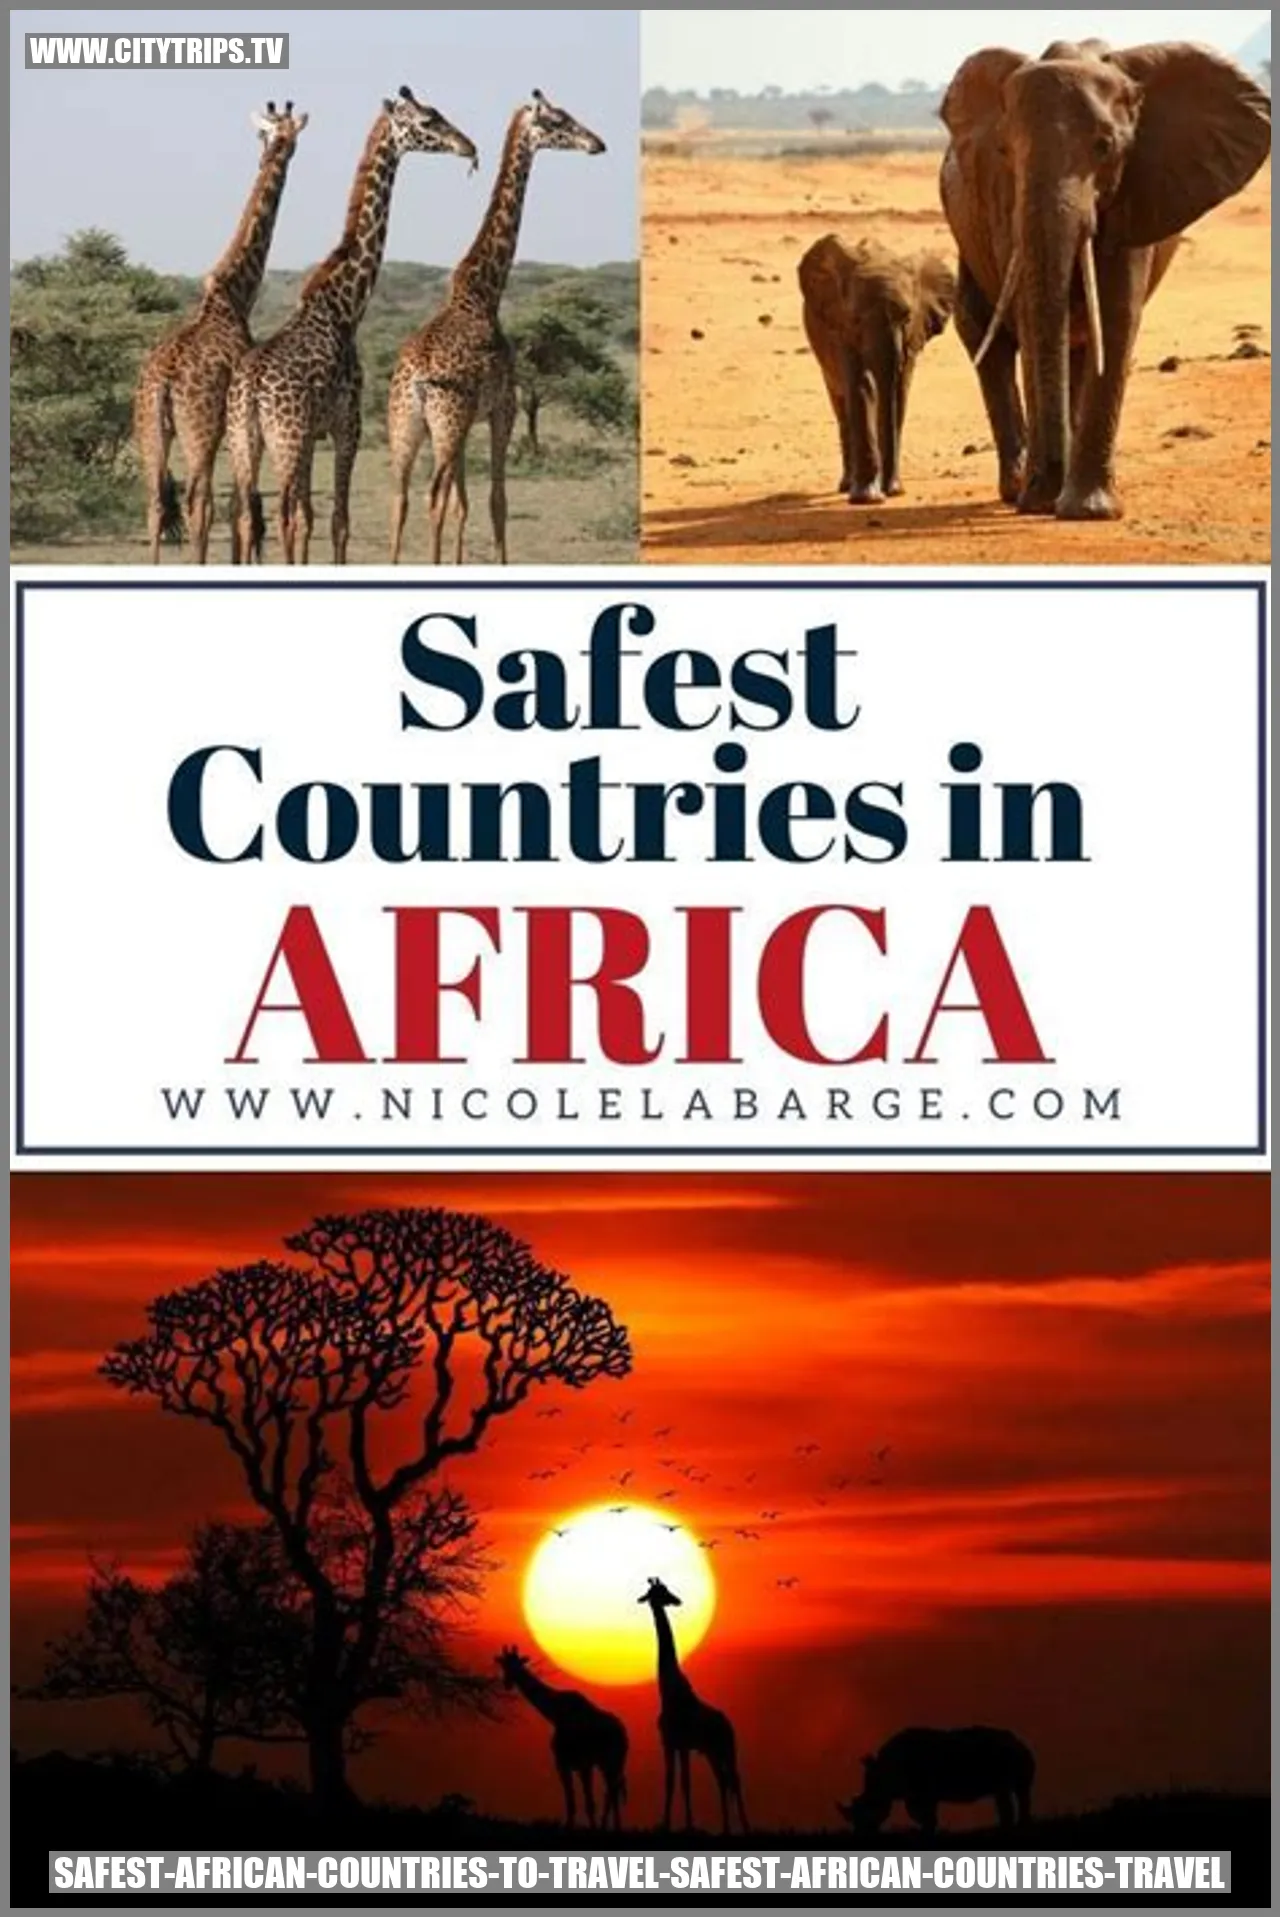 Image: Safest African Countries to Travel